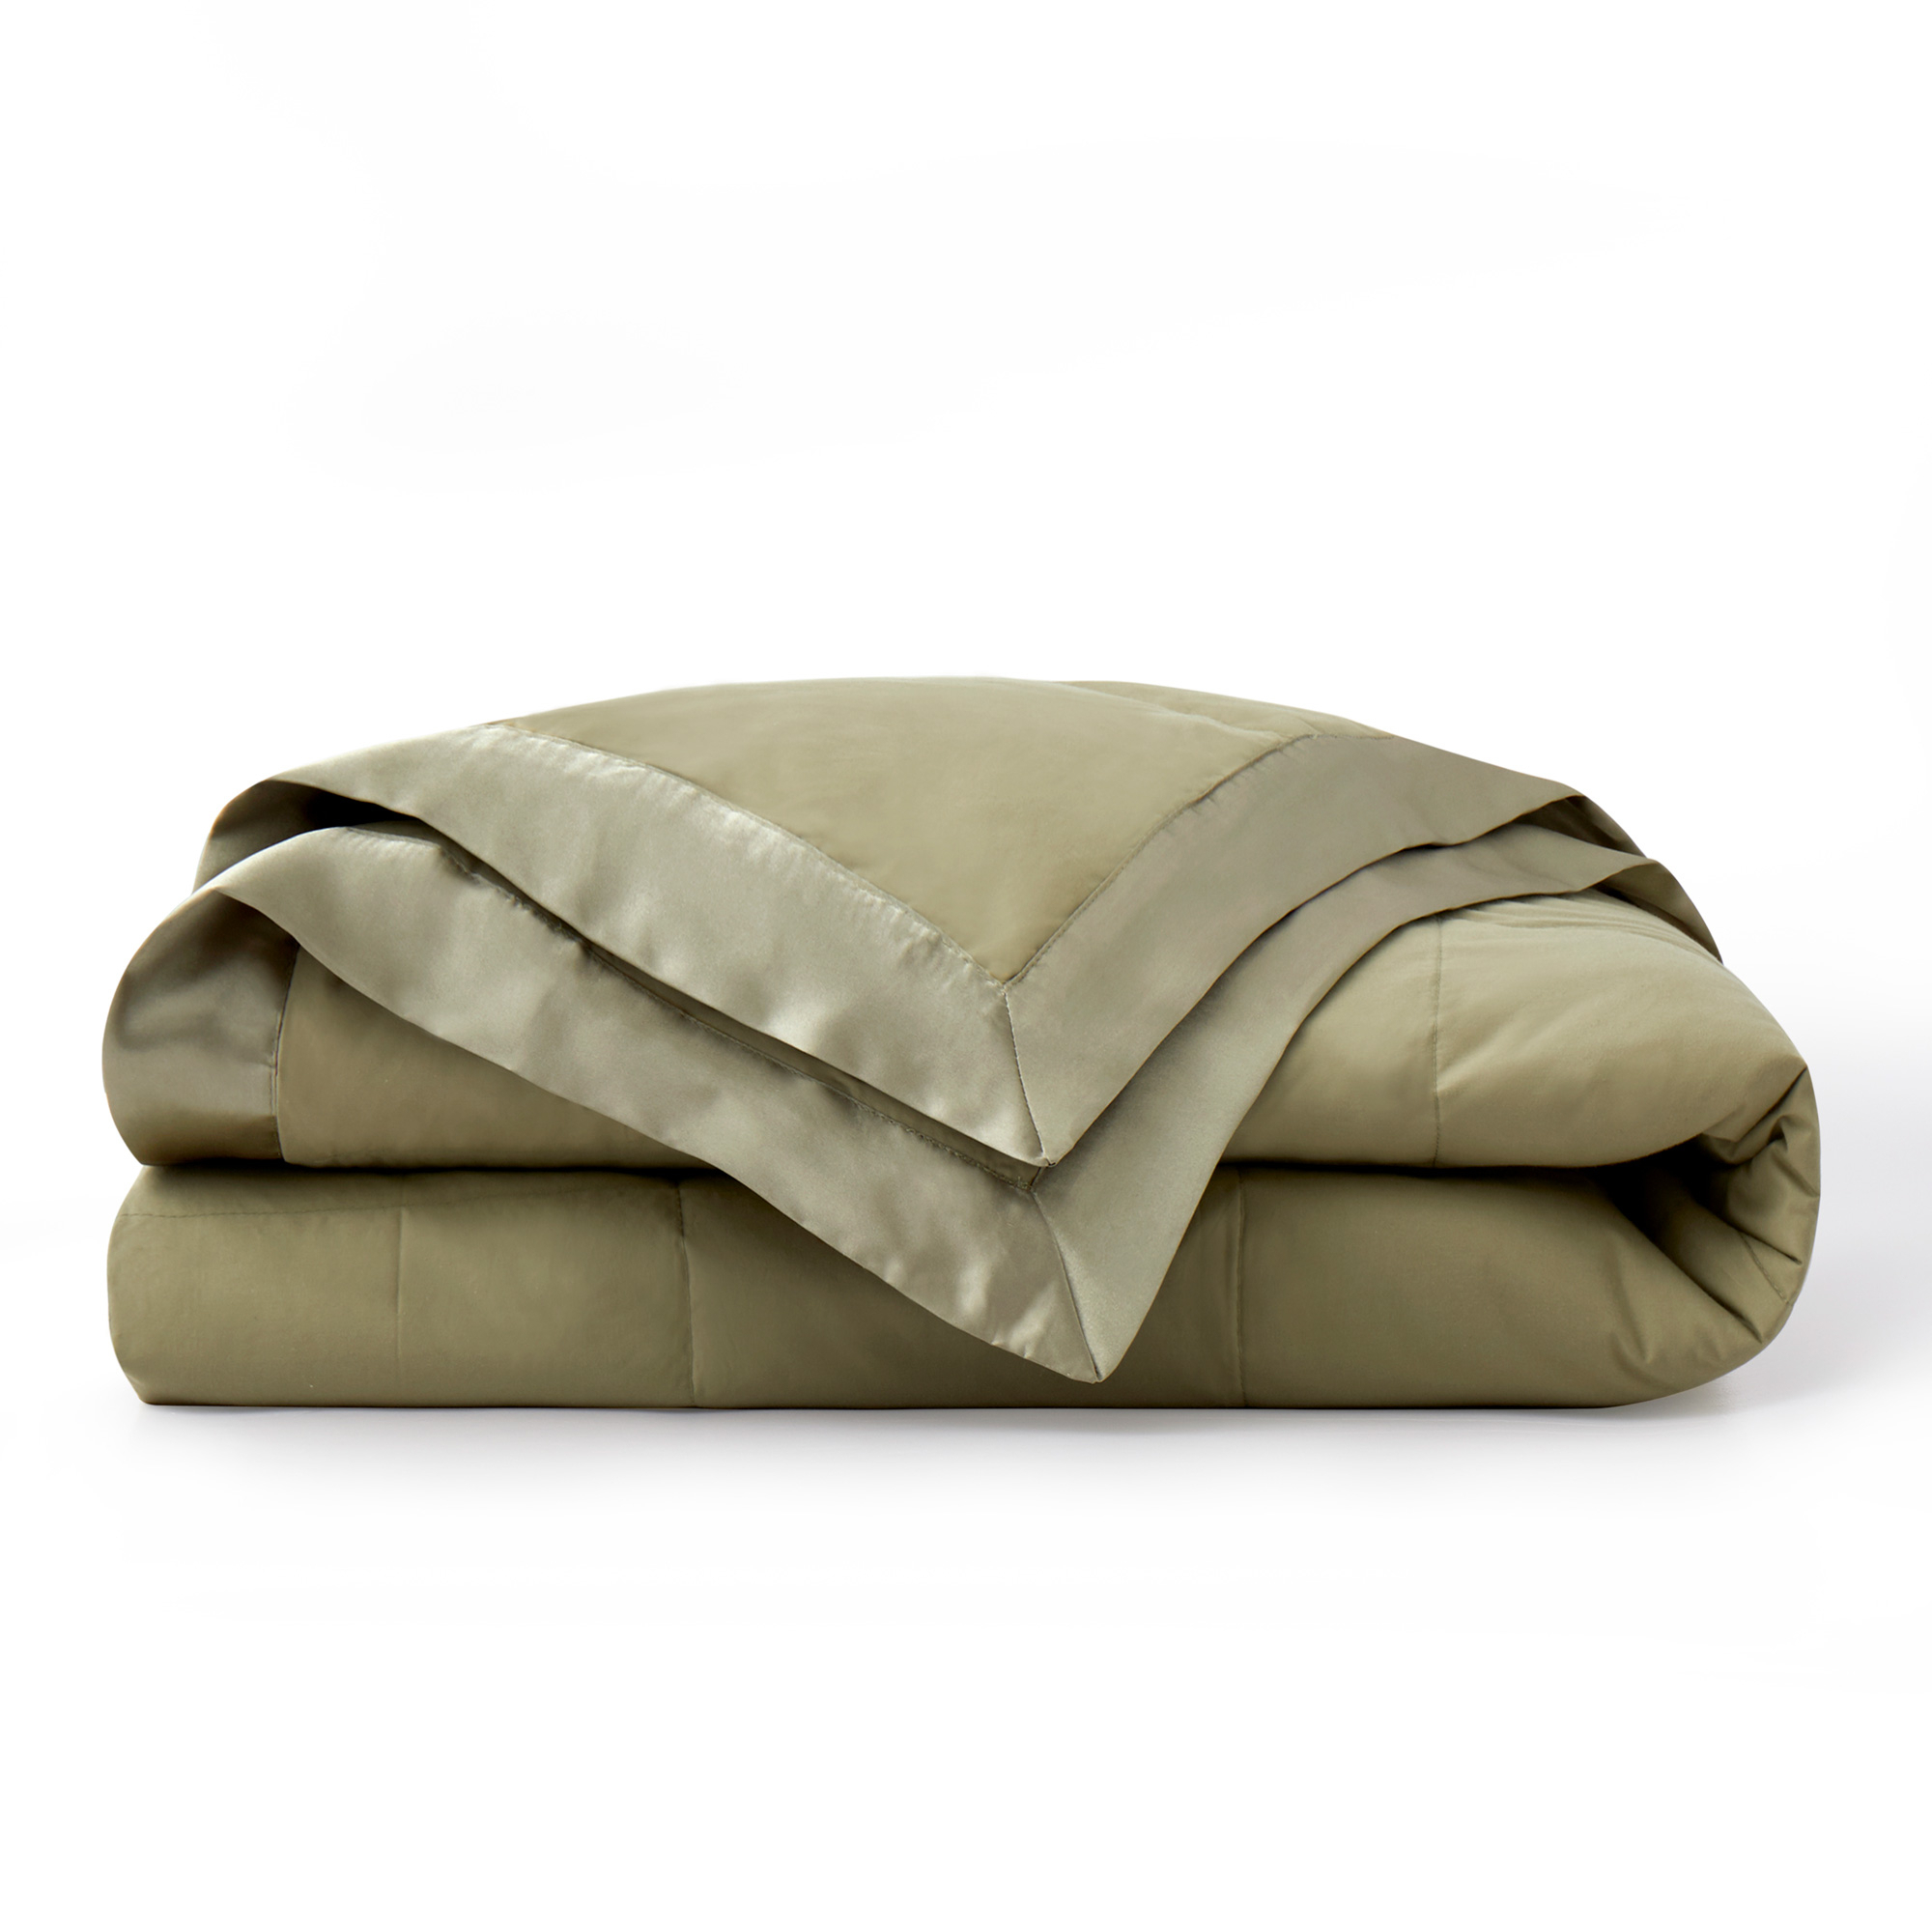 Puredown Light Weight Down Blanket, Cotton Cover, Satin Weave - Green, Full/Queen